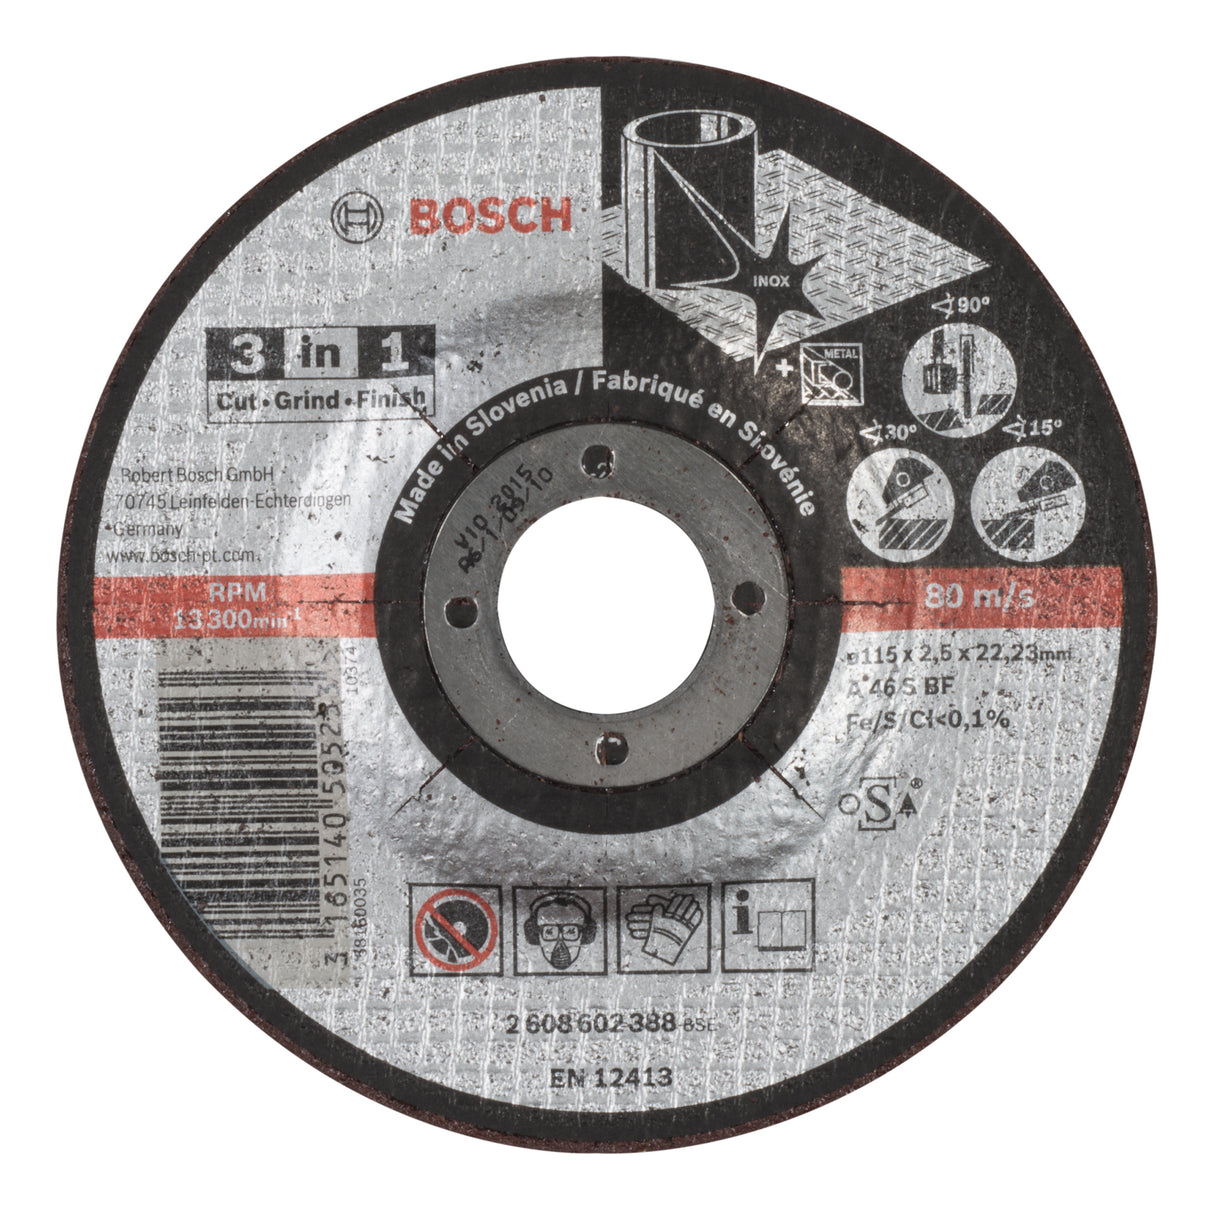 Bosch Professional 3-in-1 Cutting Disc A 46 S BF, 115mm x 2.5mm